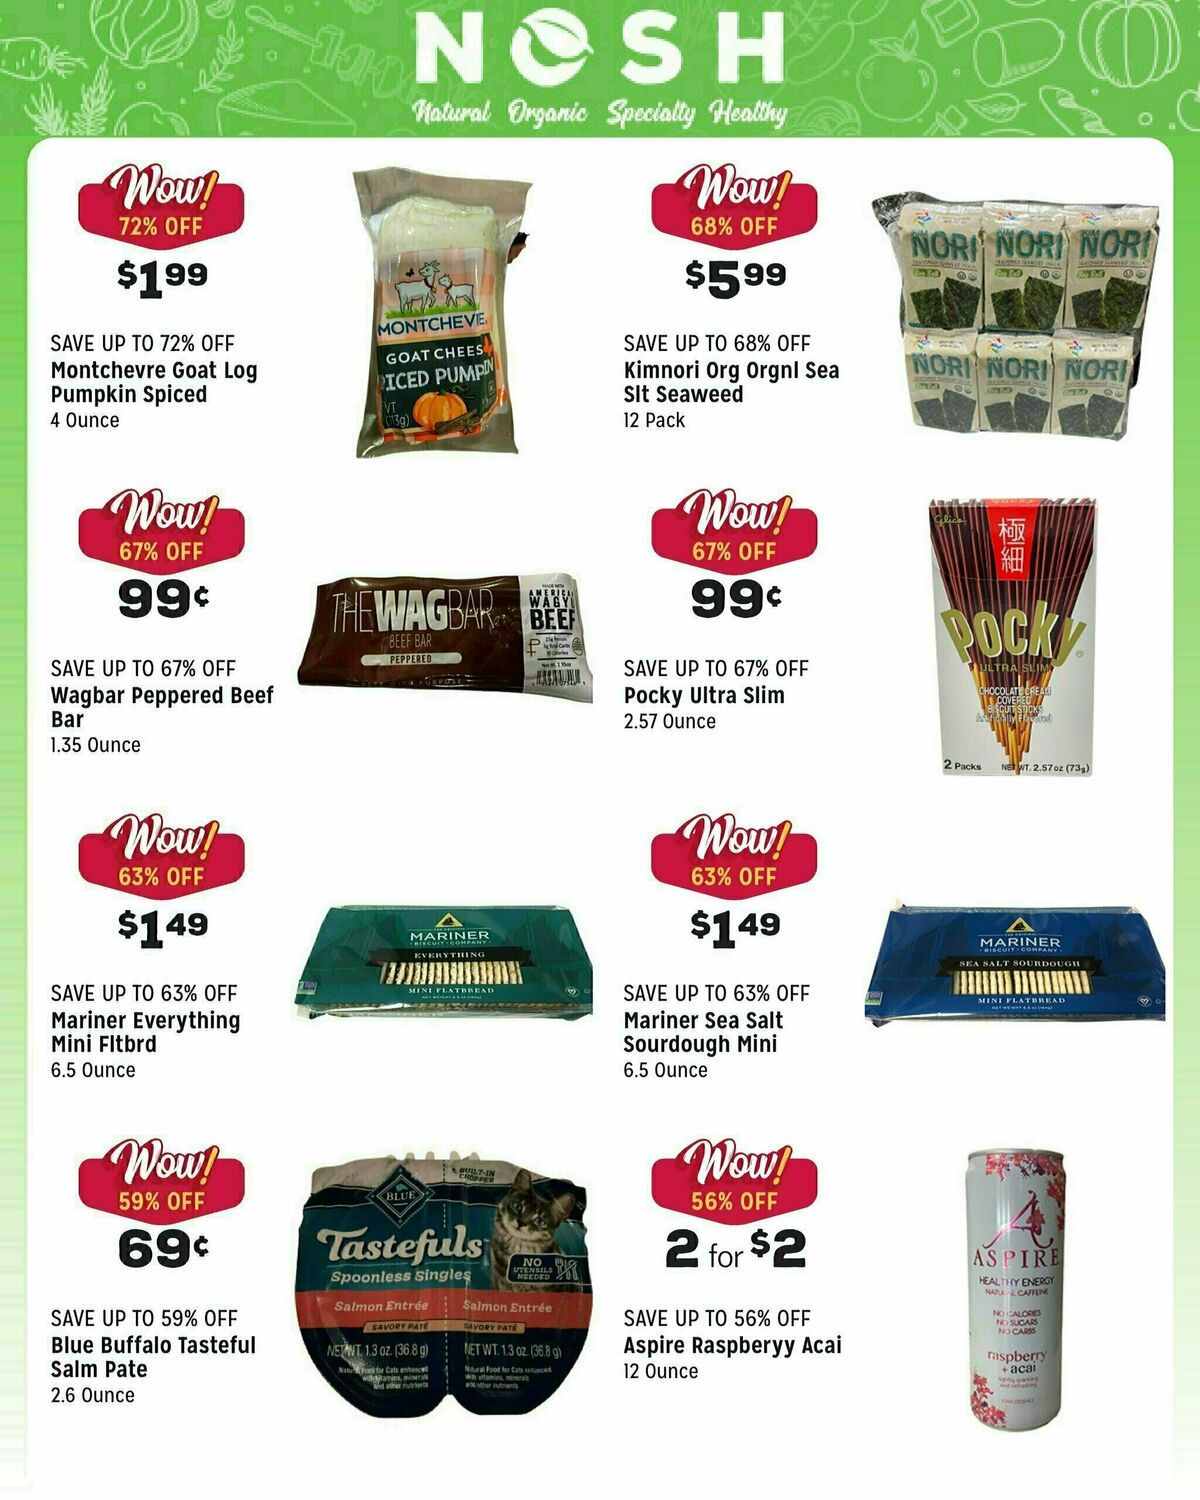 Grocery Outlet Weekly Ad from February 21